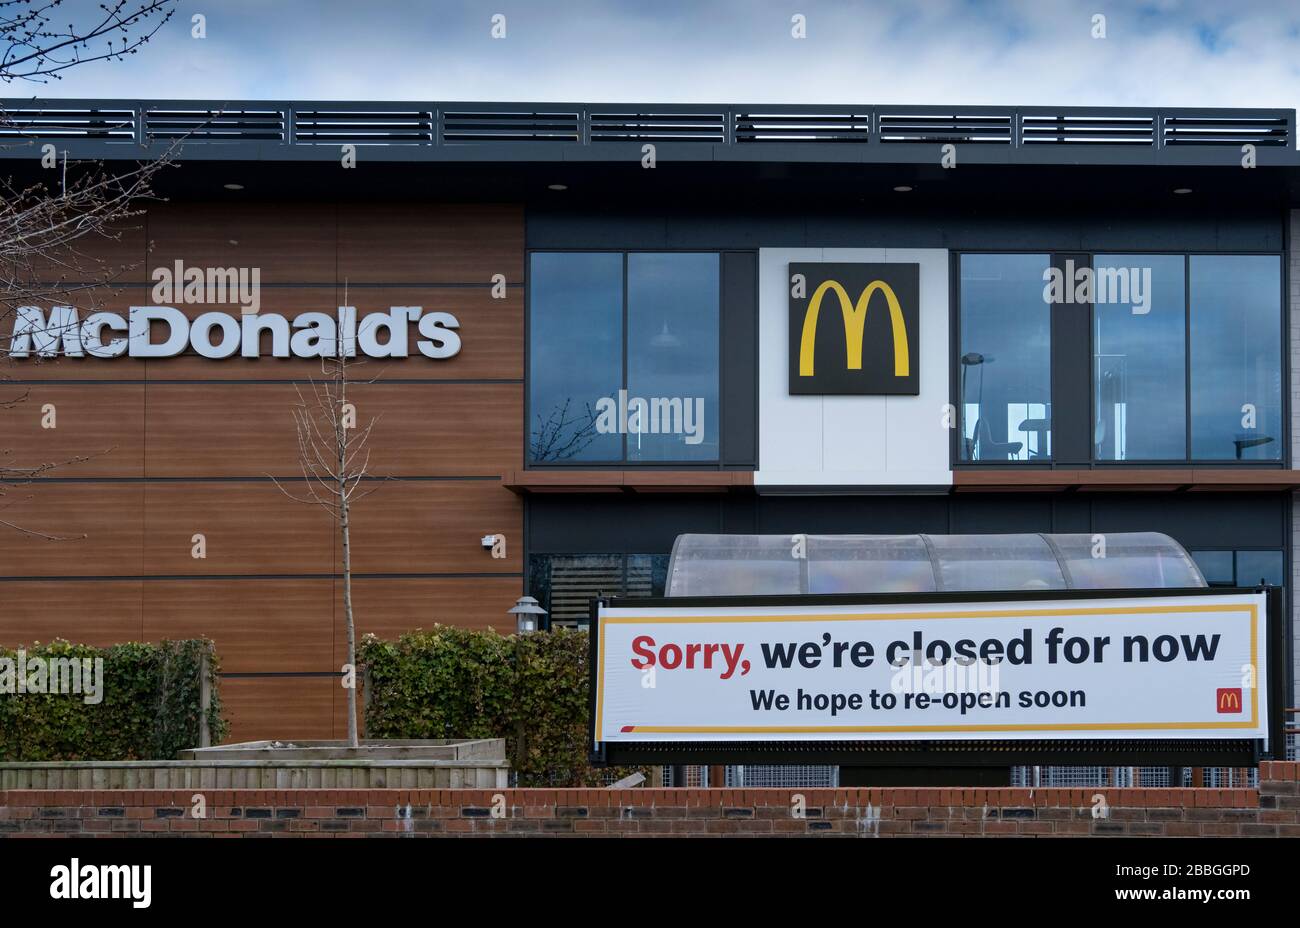 McDonalds in Northwich Closed for Covid 19 Outbreak, Northwich, Cheshire, England, UK Stock Photo